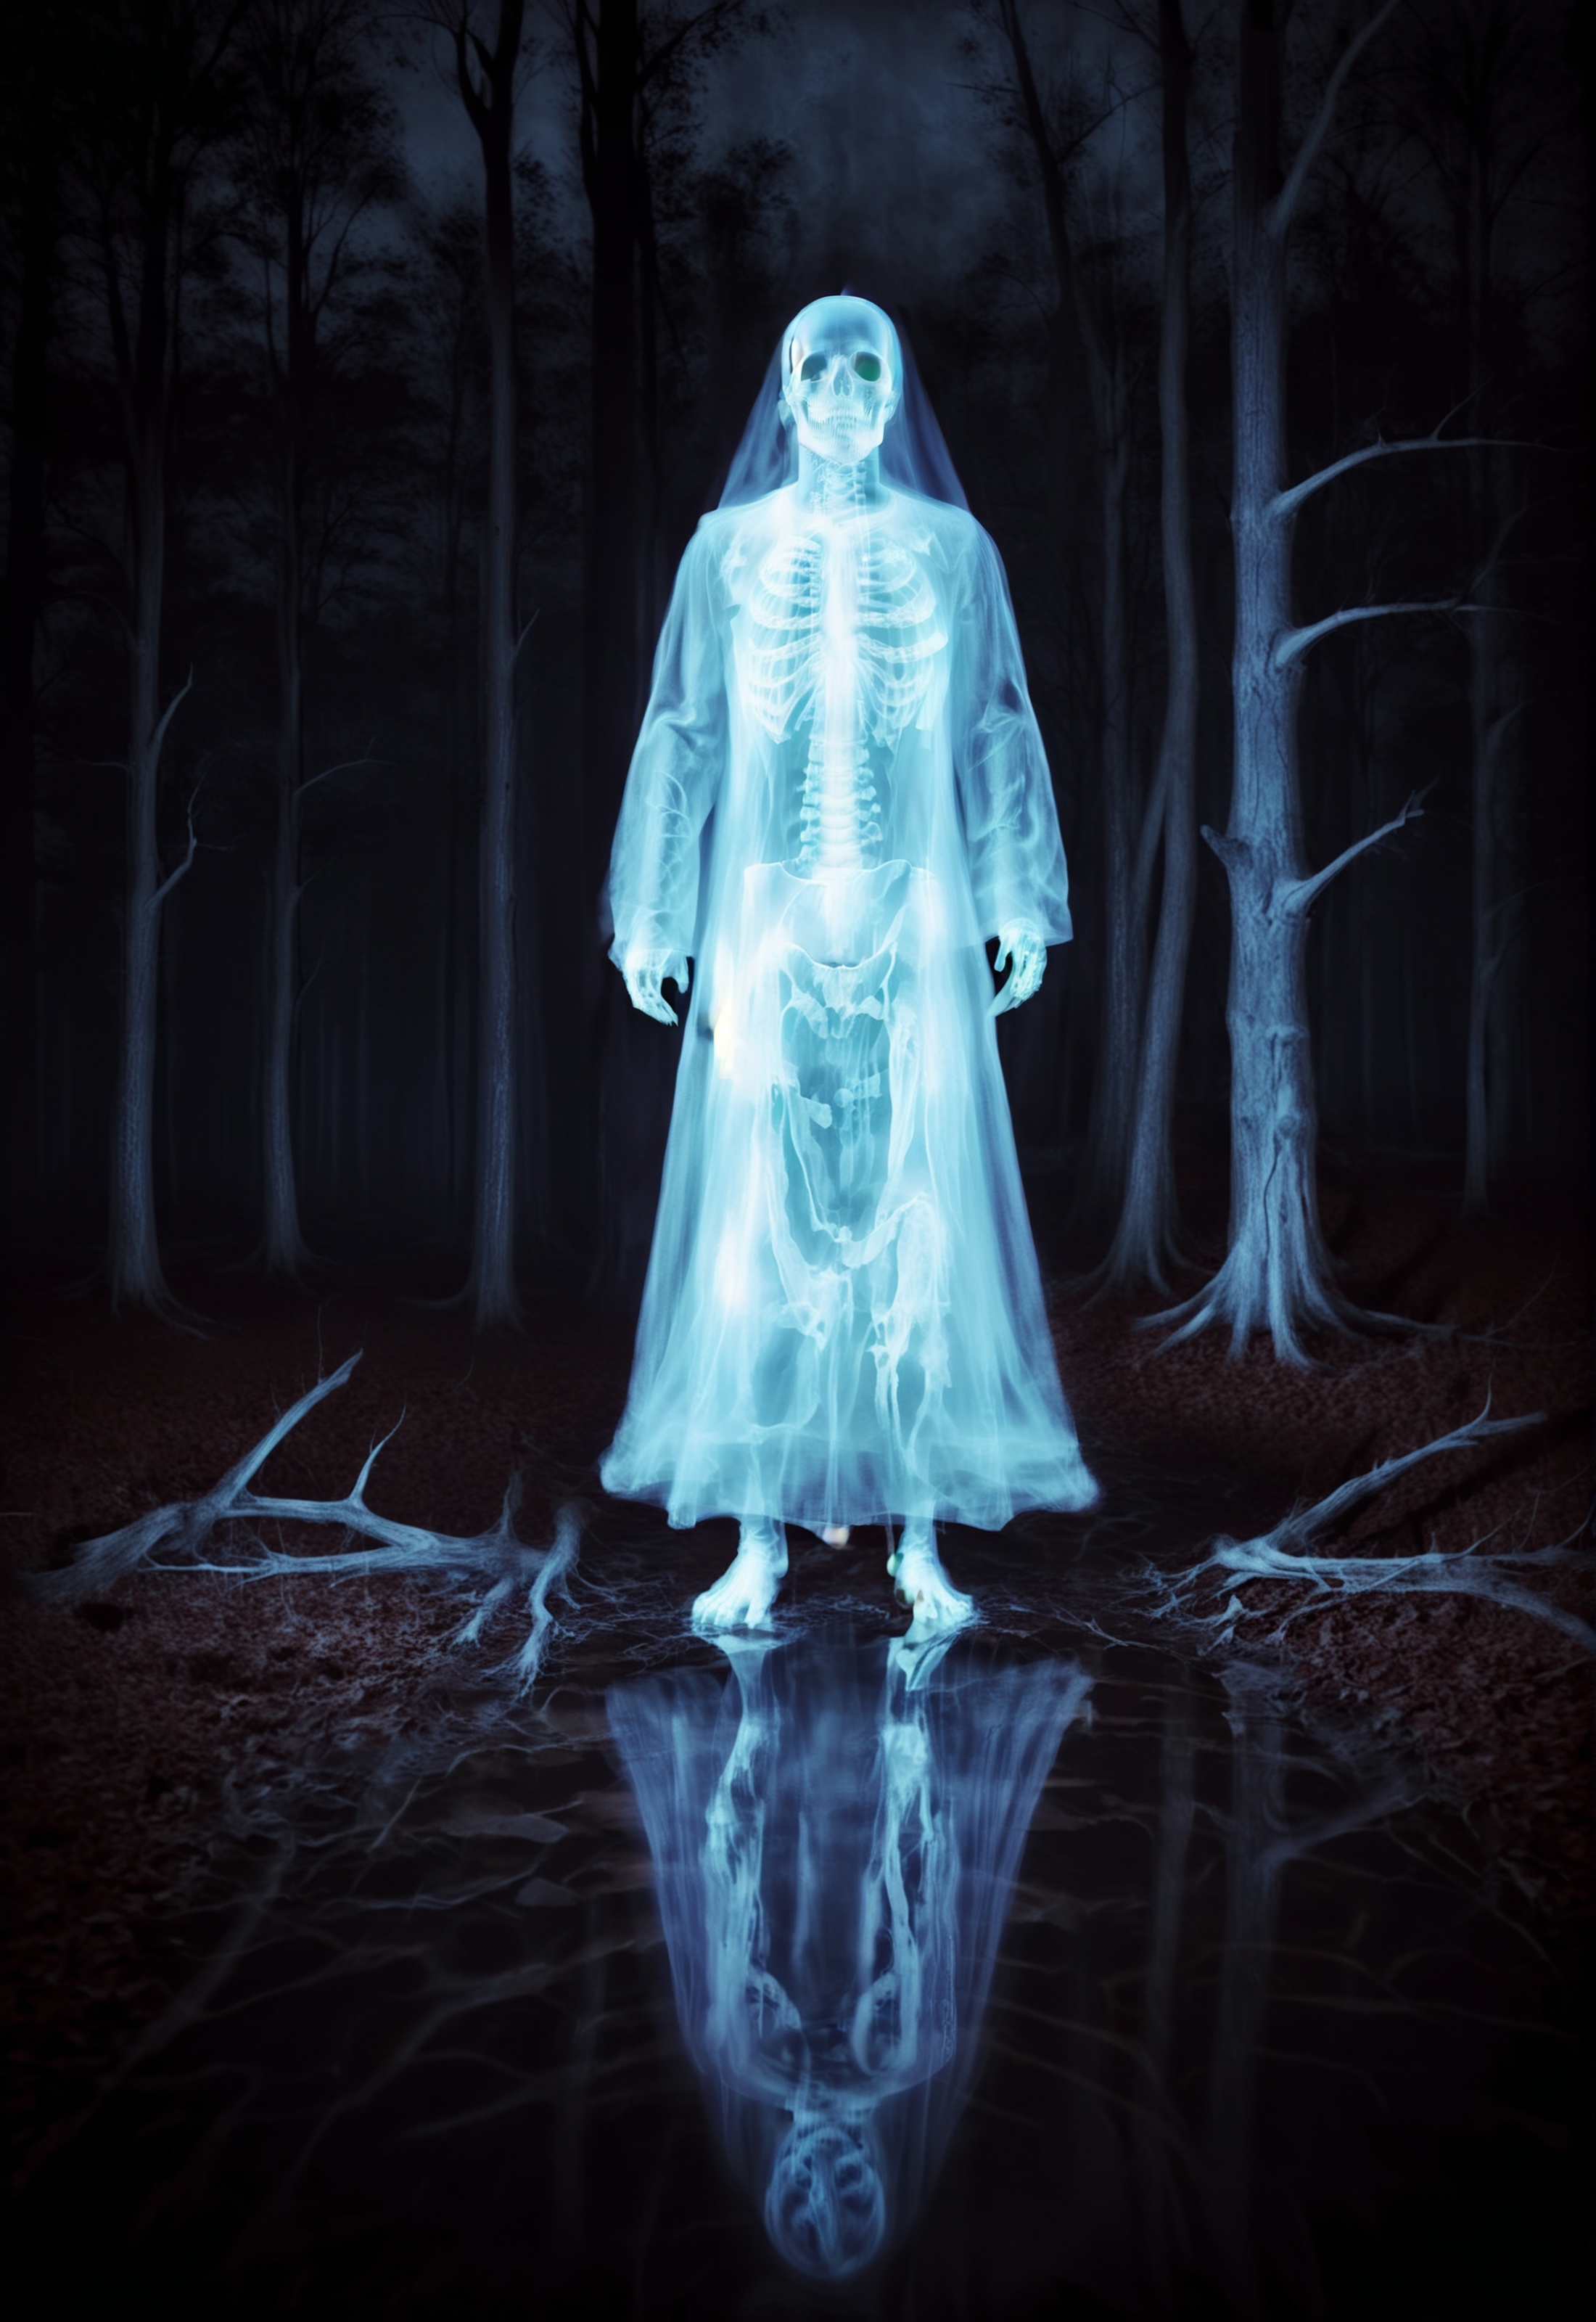 A ghostly figure in a forest, standing in a puddle.